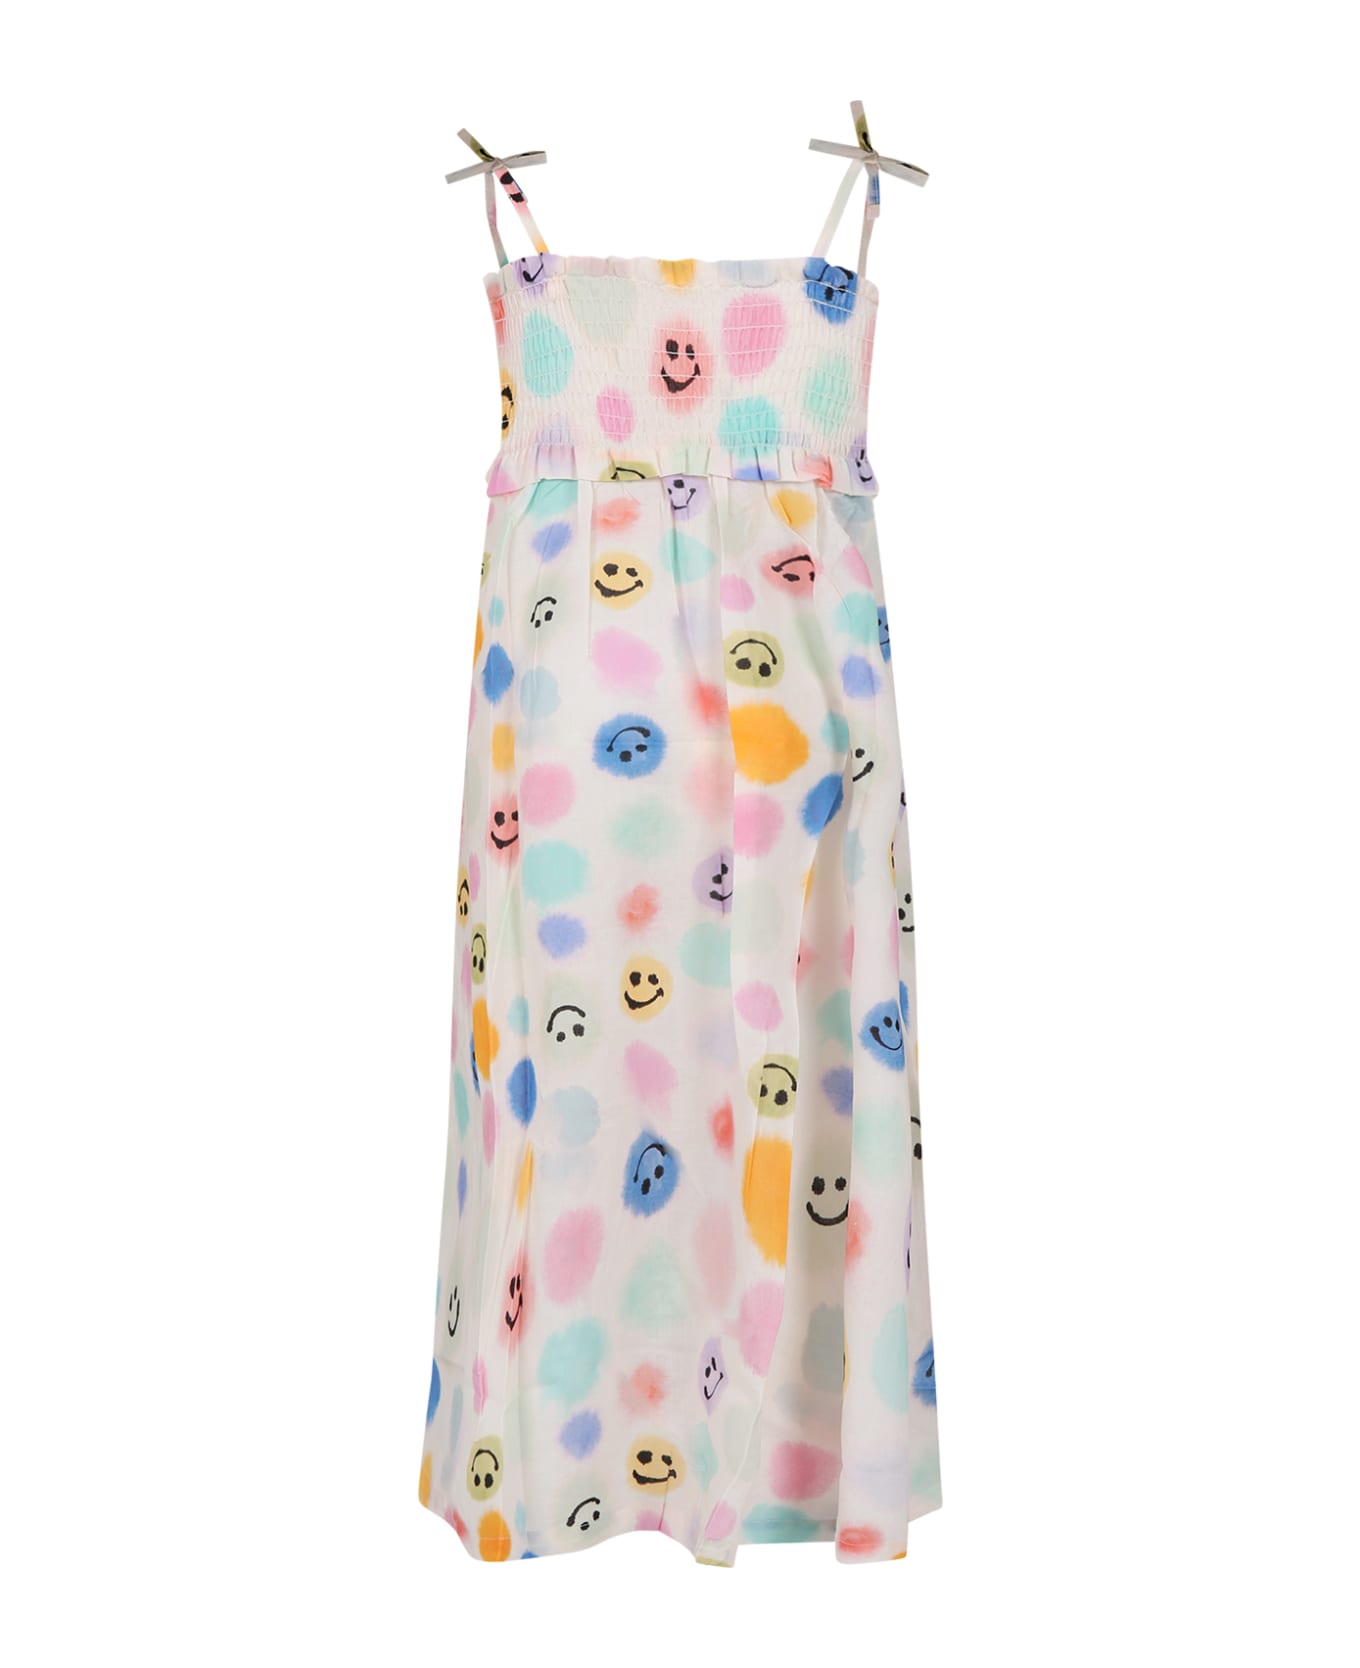 Molo Ivory Beach Cover-up For Girl With Smiley And Polka Dots - Multicolor